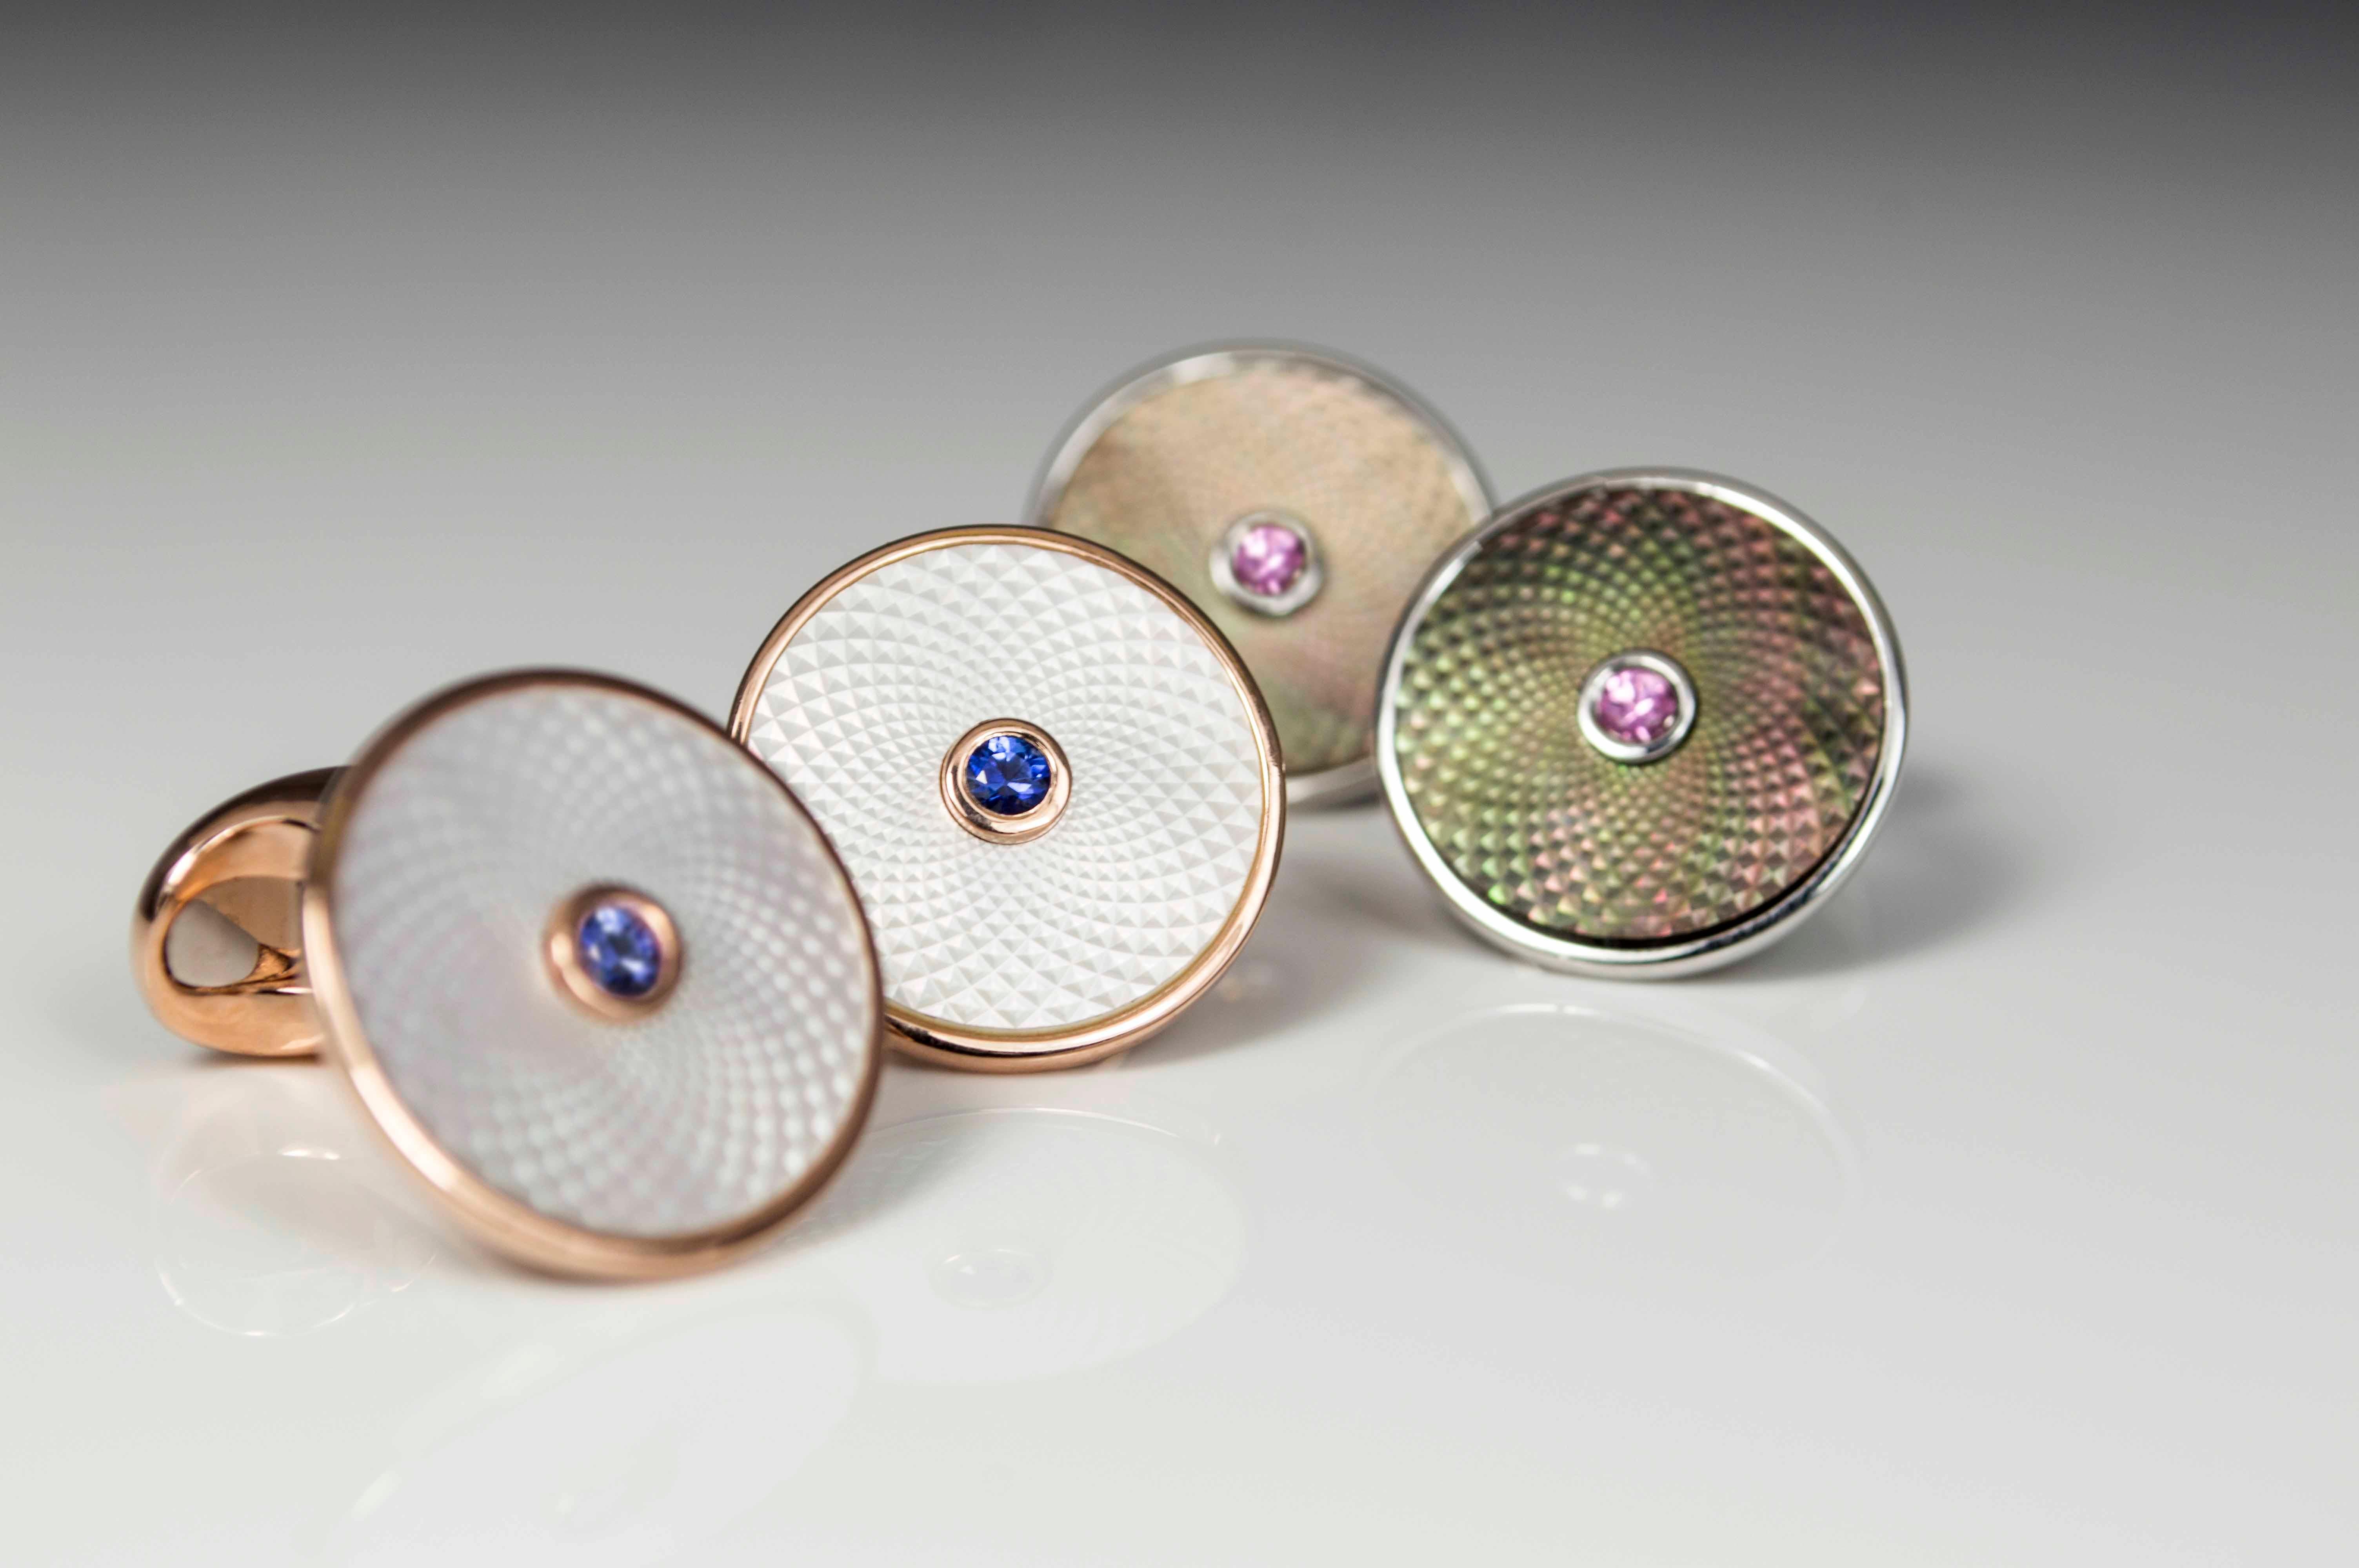 DEAKIN & FRANCIS, Piccadilly Arcade, London

Capture your dreams with our Dreamcatcher Collection; These cufflinks each contain a shimmery, precision cut piece of mother-of-pearl in either grey or white and are finished off with a precious gemstone